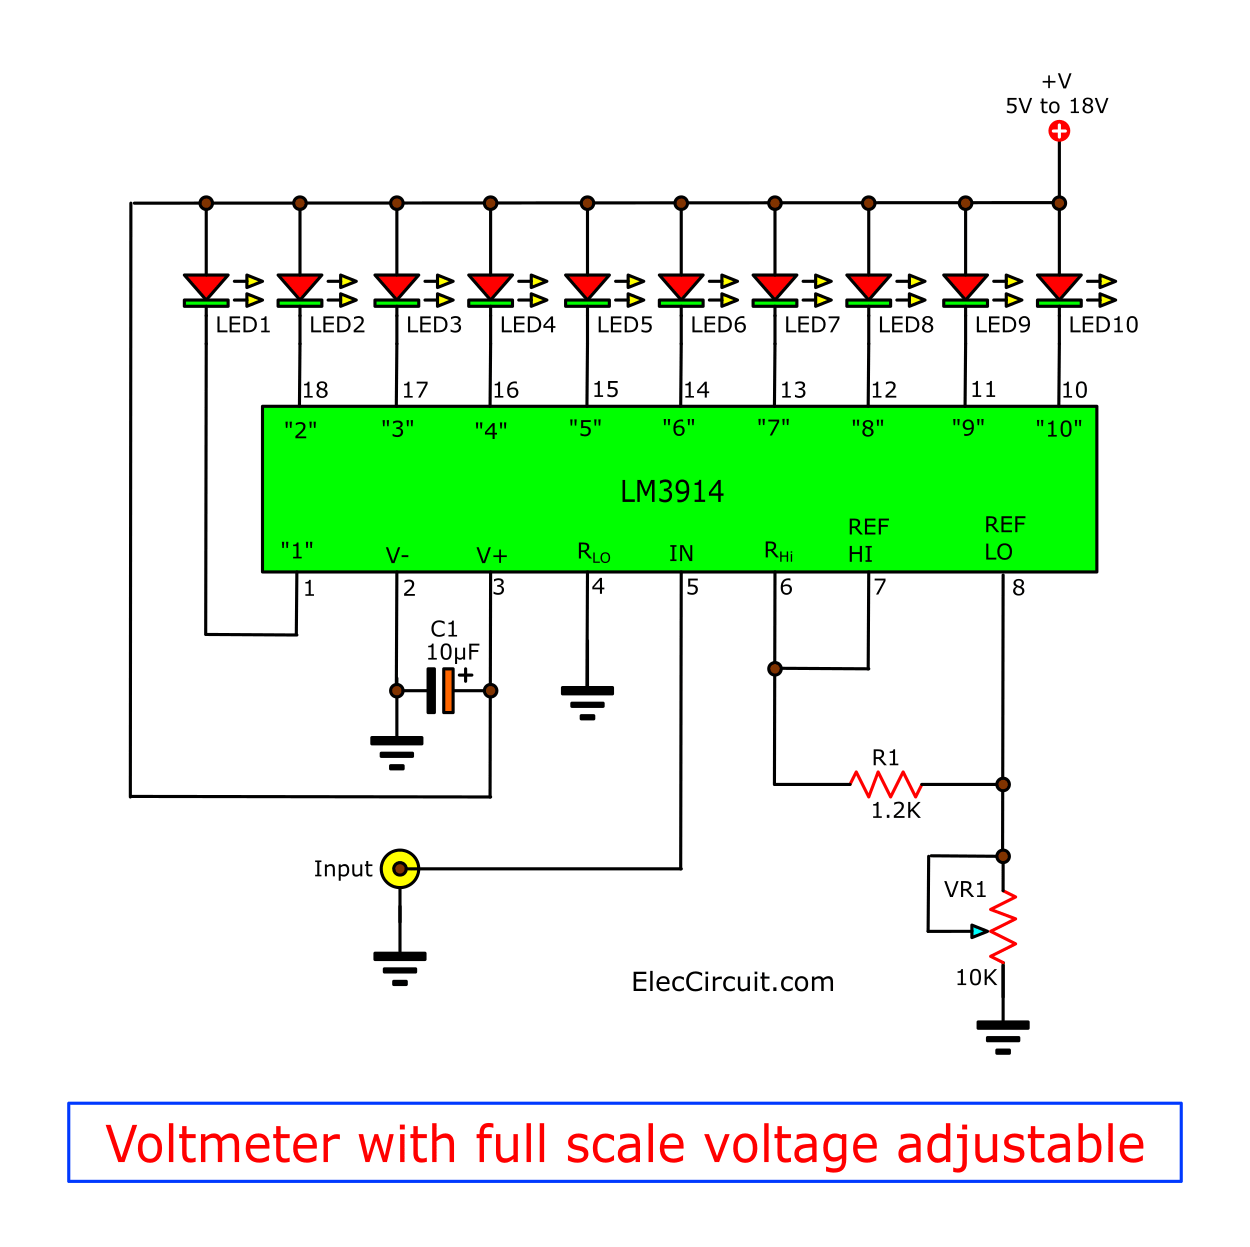 Voltmeter with full scale voltage adjustable